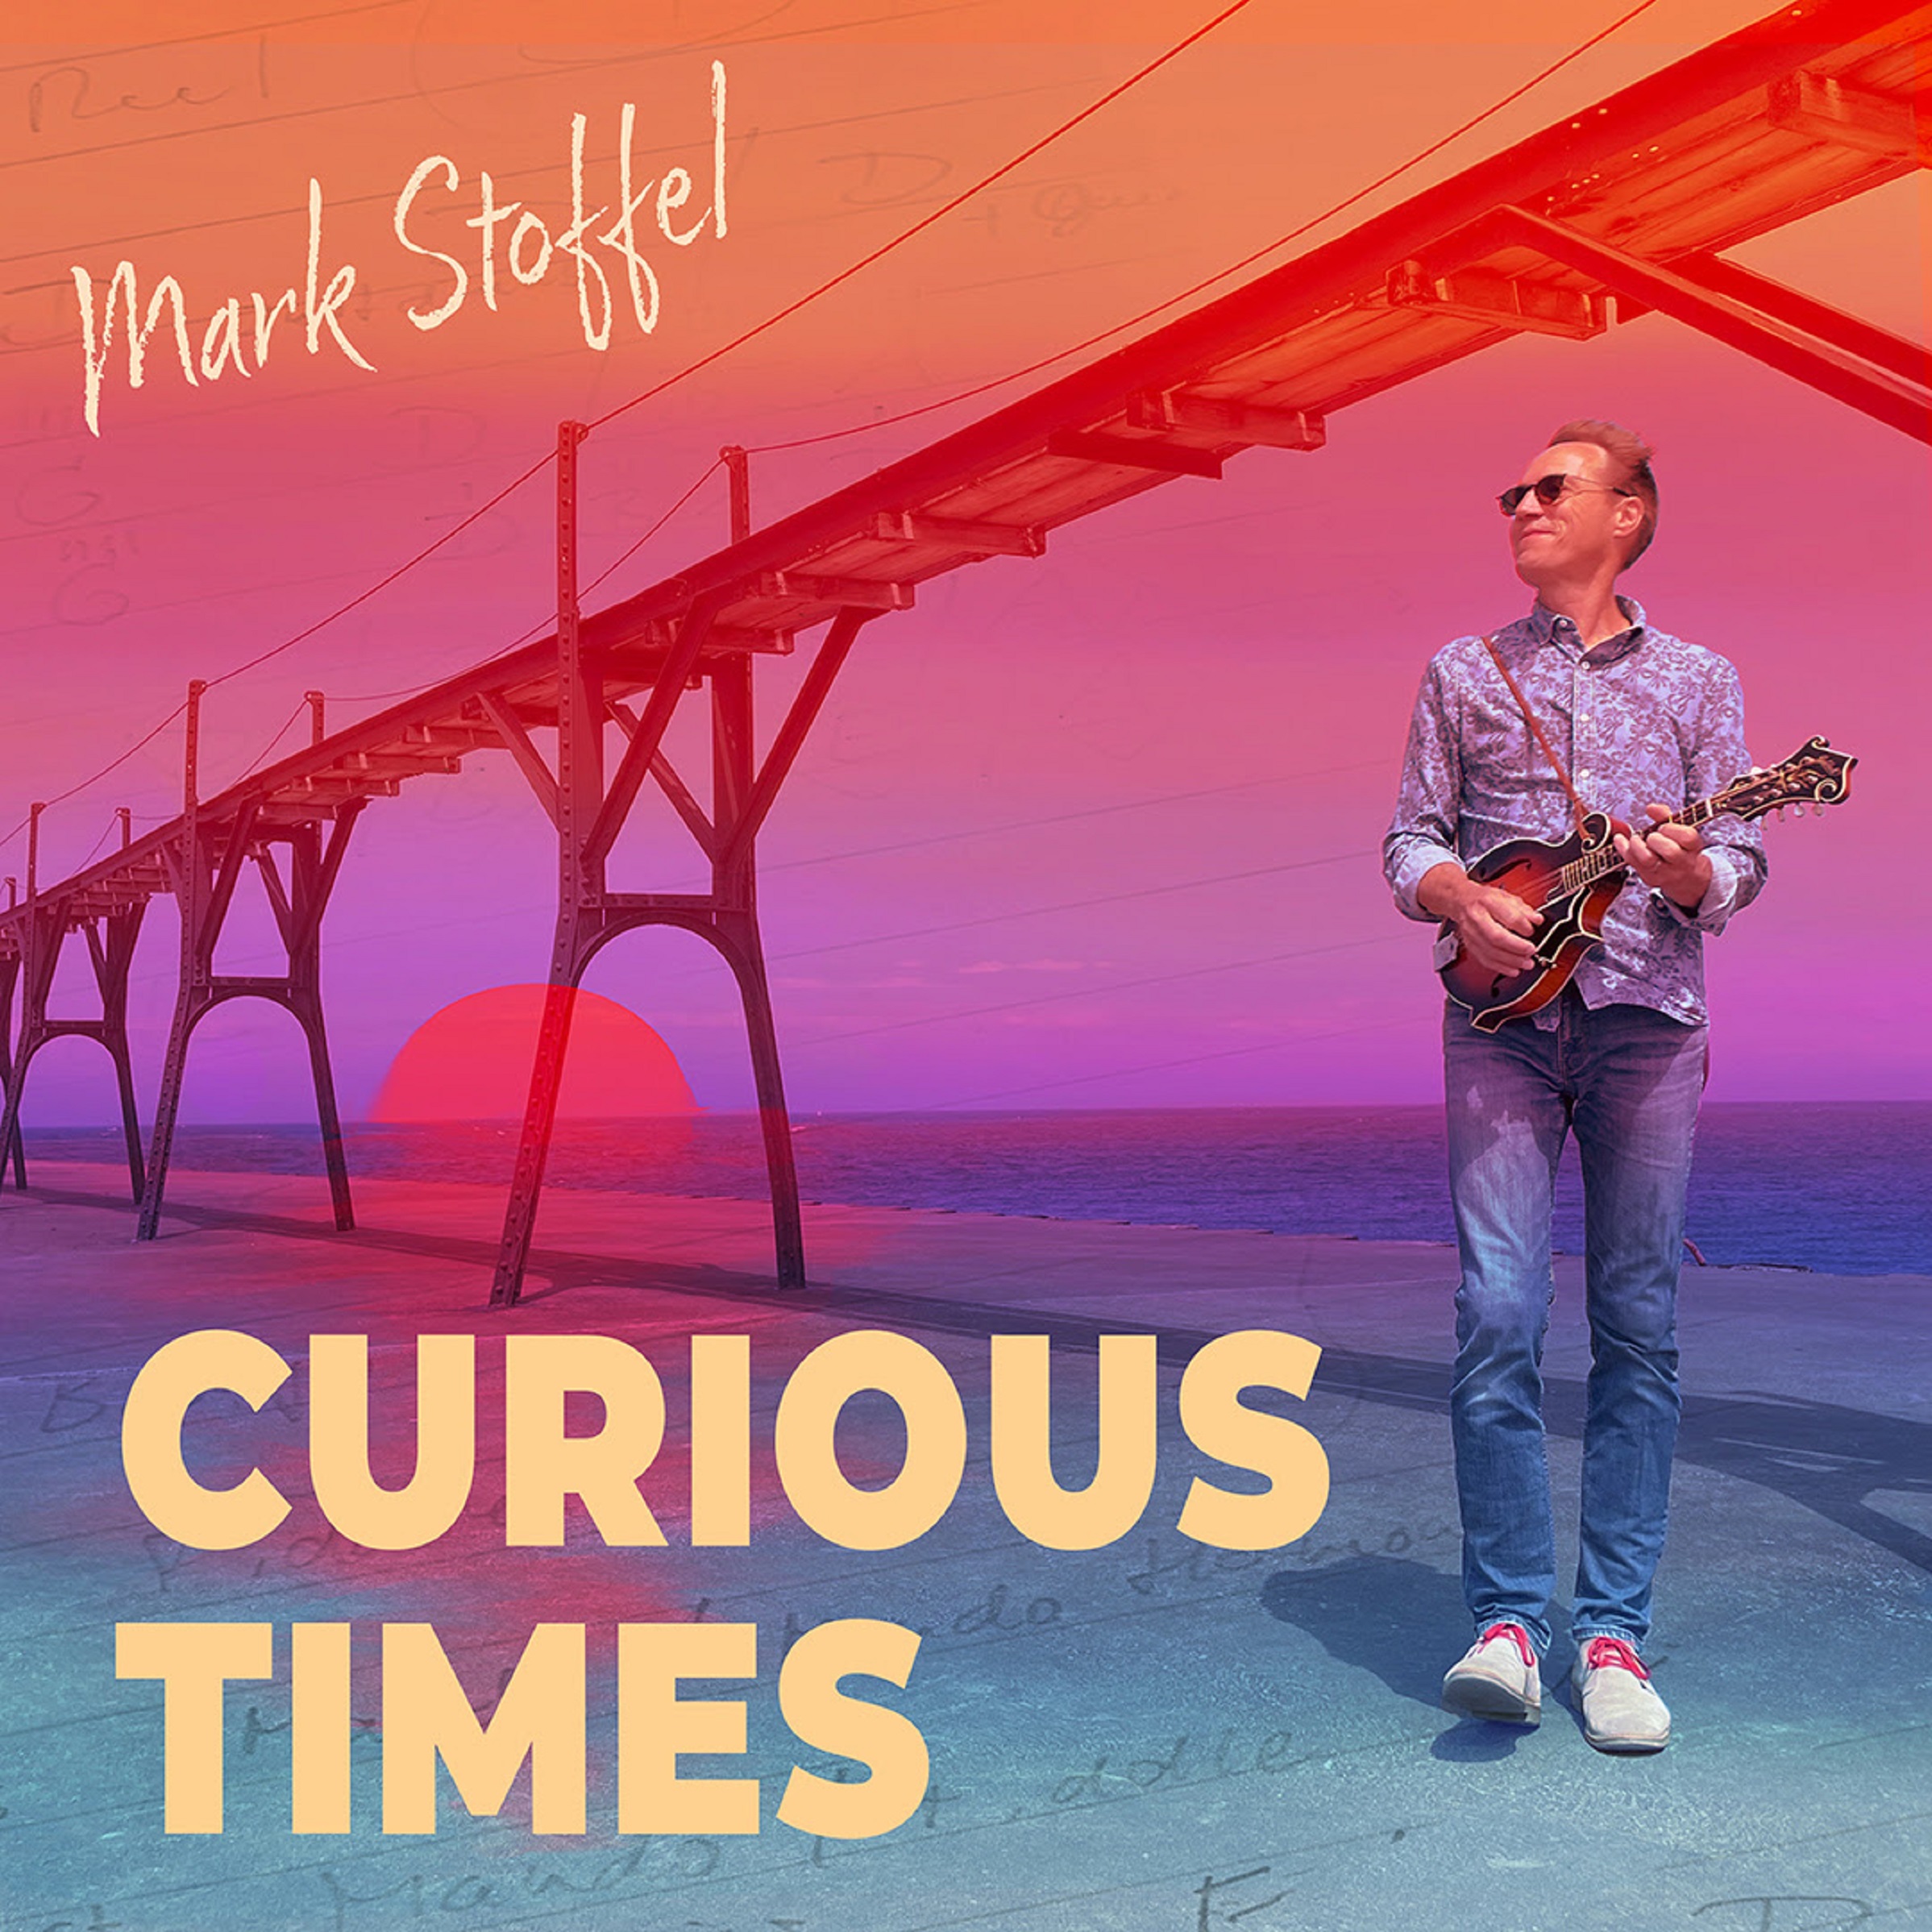 Mark Stoffel recalls the uncertainty of “Curious Times"